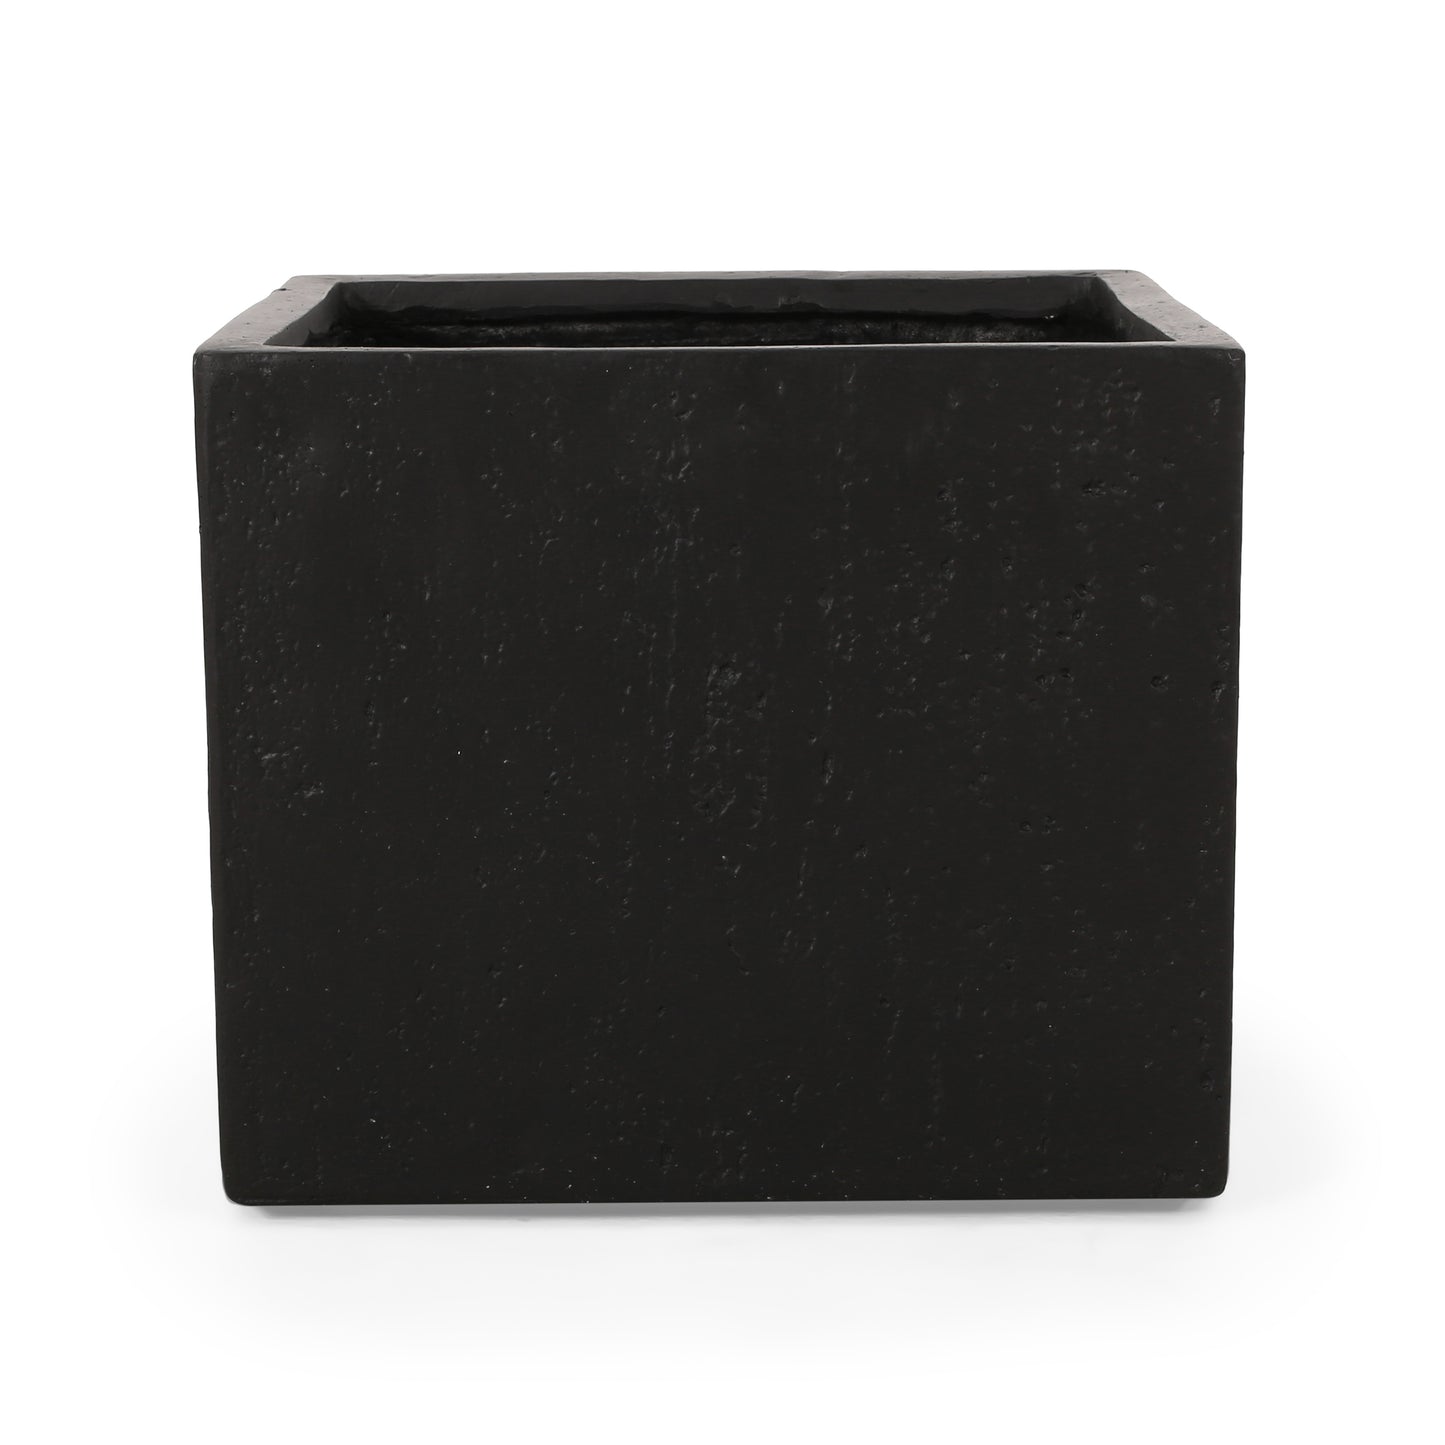 Fardeen Outdoor Modern Cast Stone Square Planters (Set of 2)